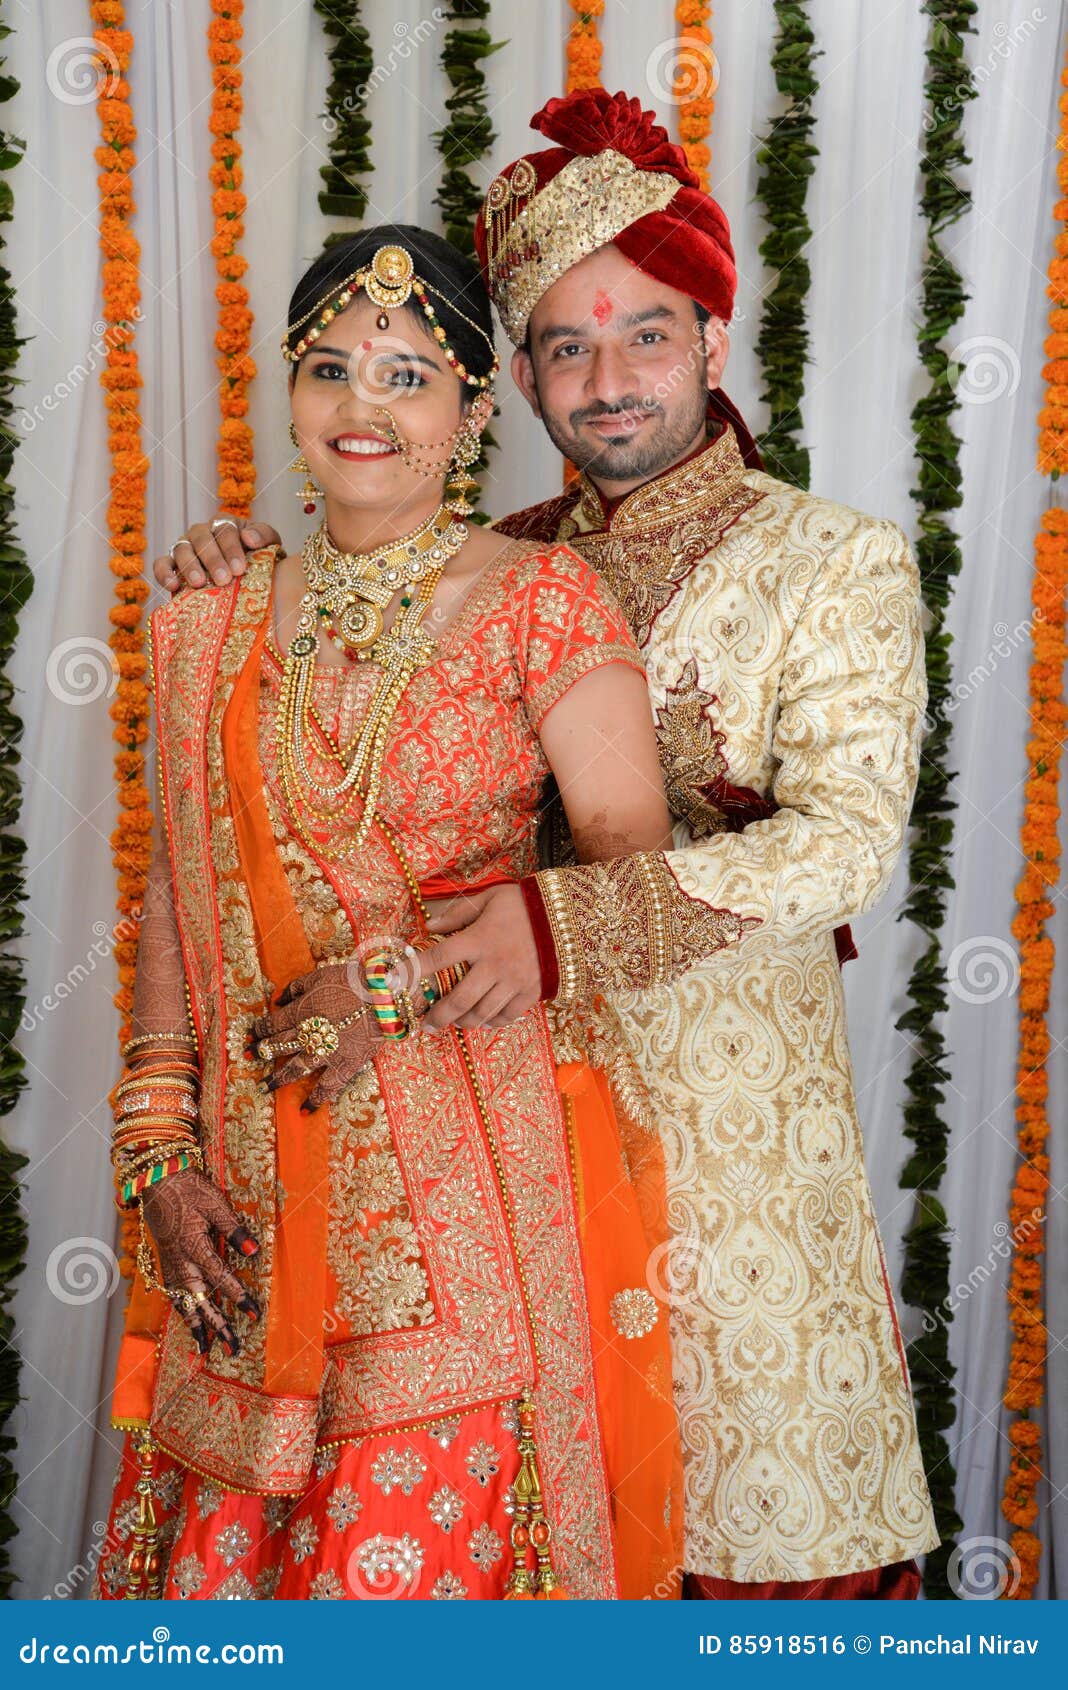 Wedding Poses For Indian Bride And Groom